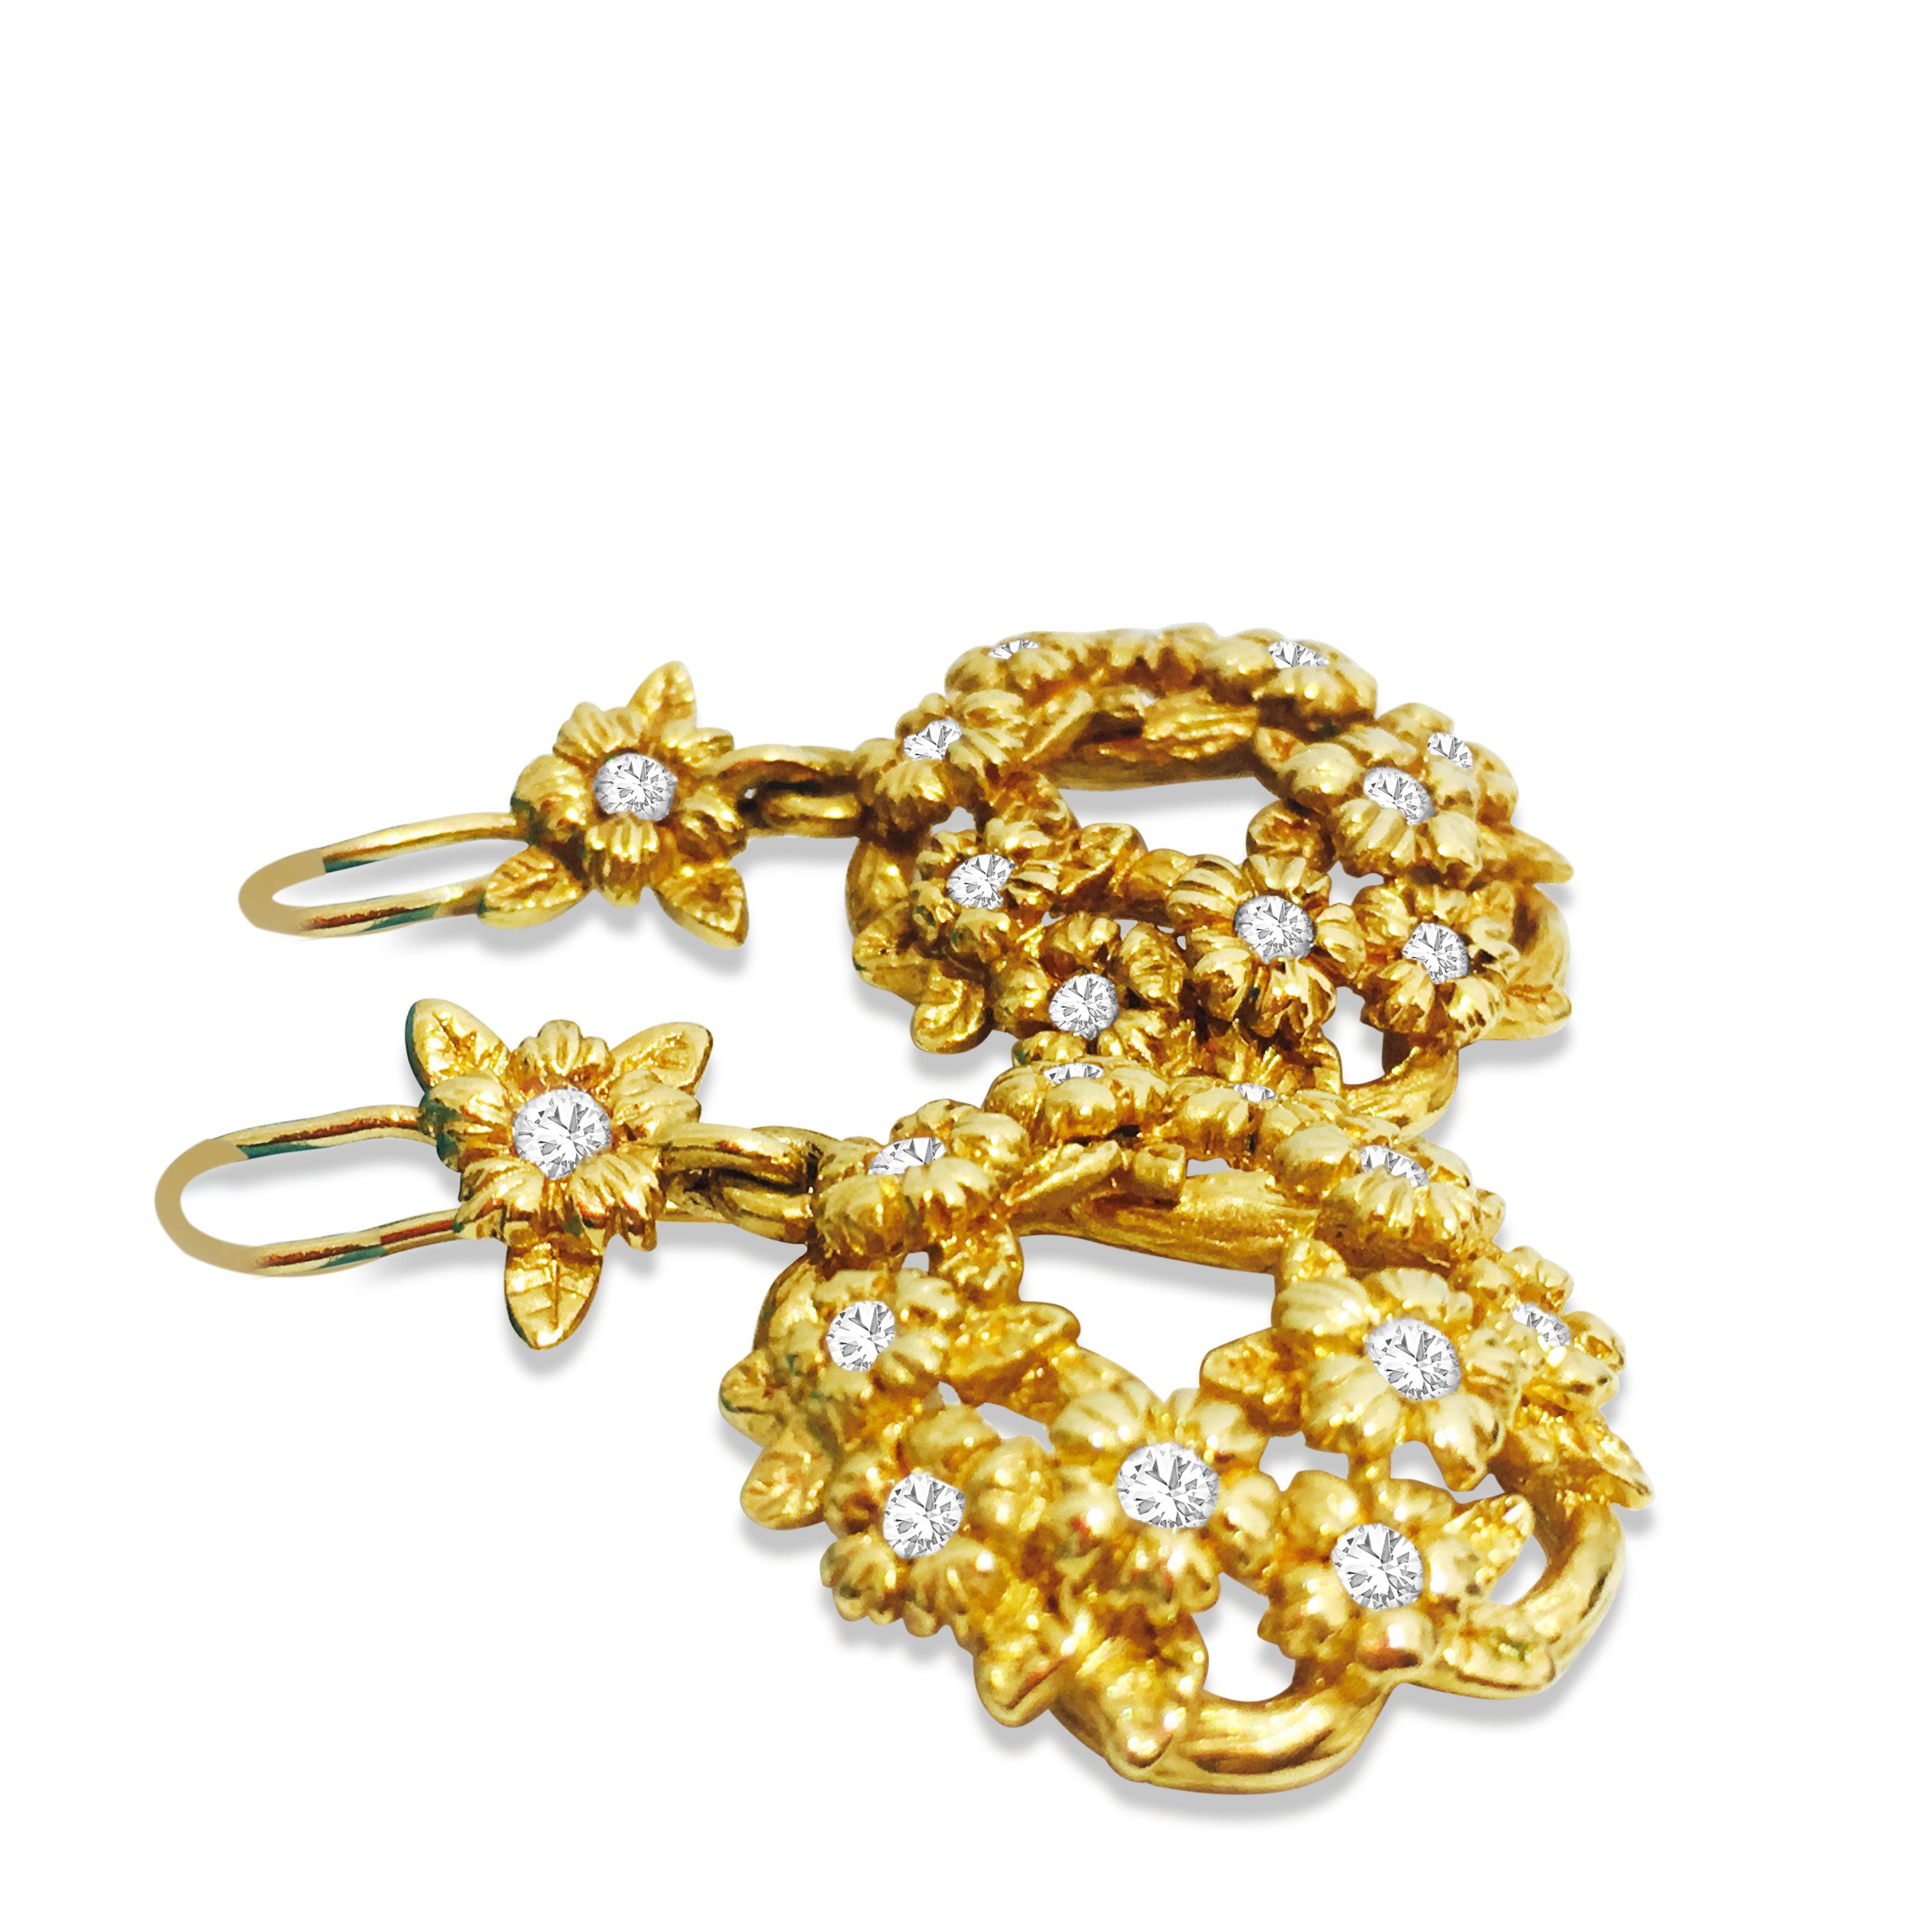 Metal: 18k yellow gold. TCW of Diamonds: 0.70cts.  Clarity: SI. Color: F-G. Round brilliant cut diamonds. 
Brand: Stephen Dweck
Ladies, Yellow gold and diamond earrings. 